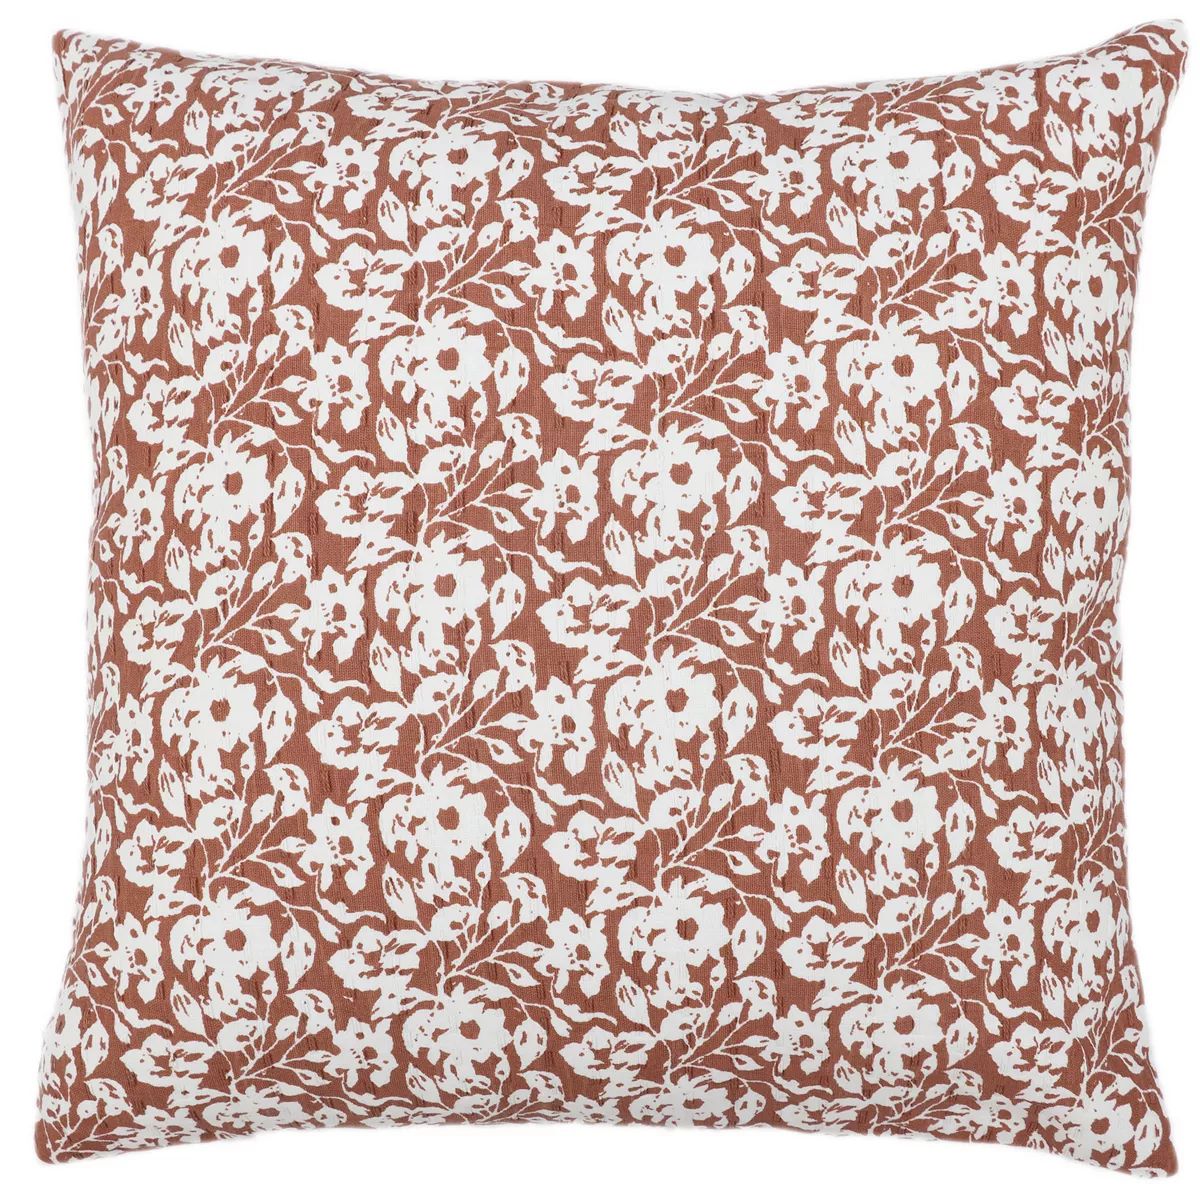 Sonoma Goods For Life® 20x20 Ultimate Feather Fill Decorative Pillow | Kohl's